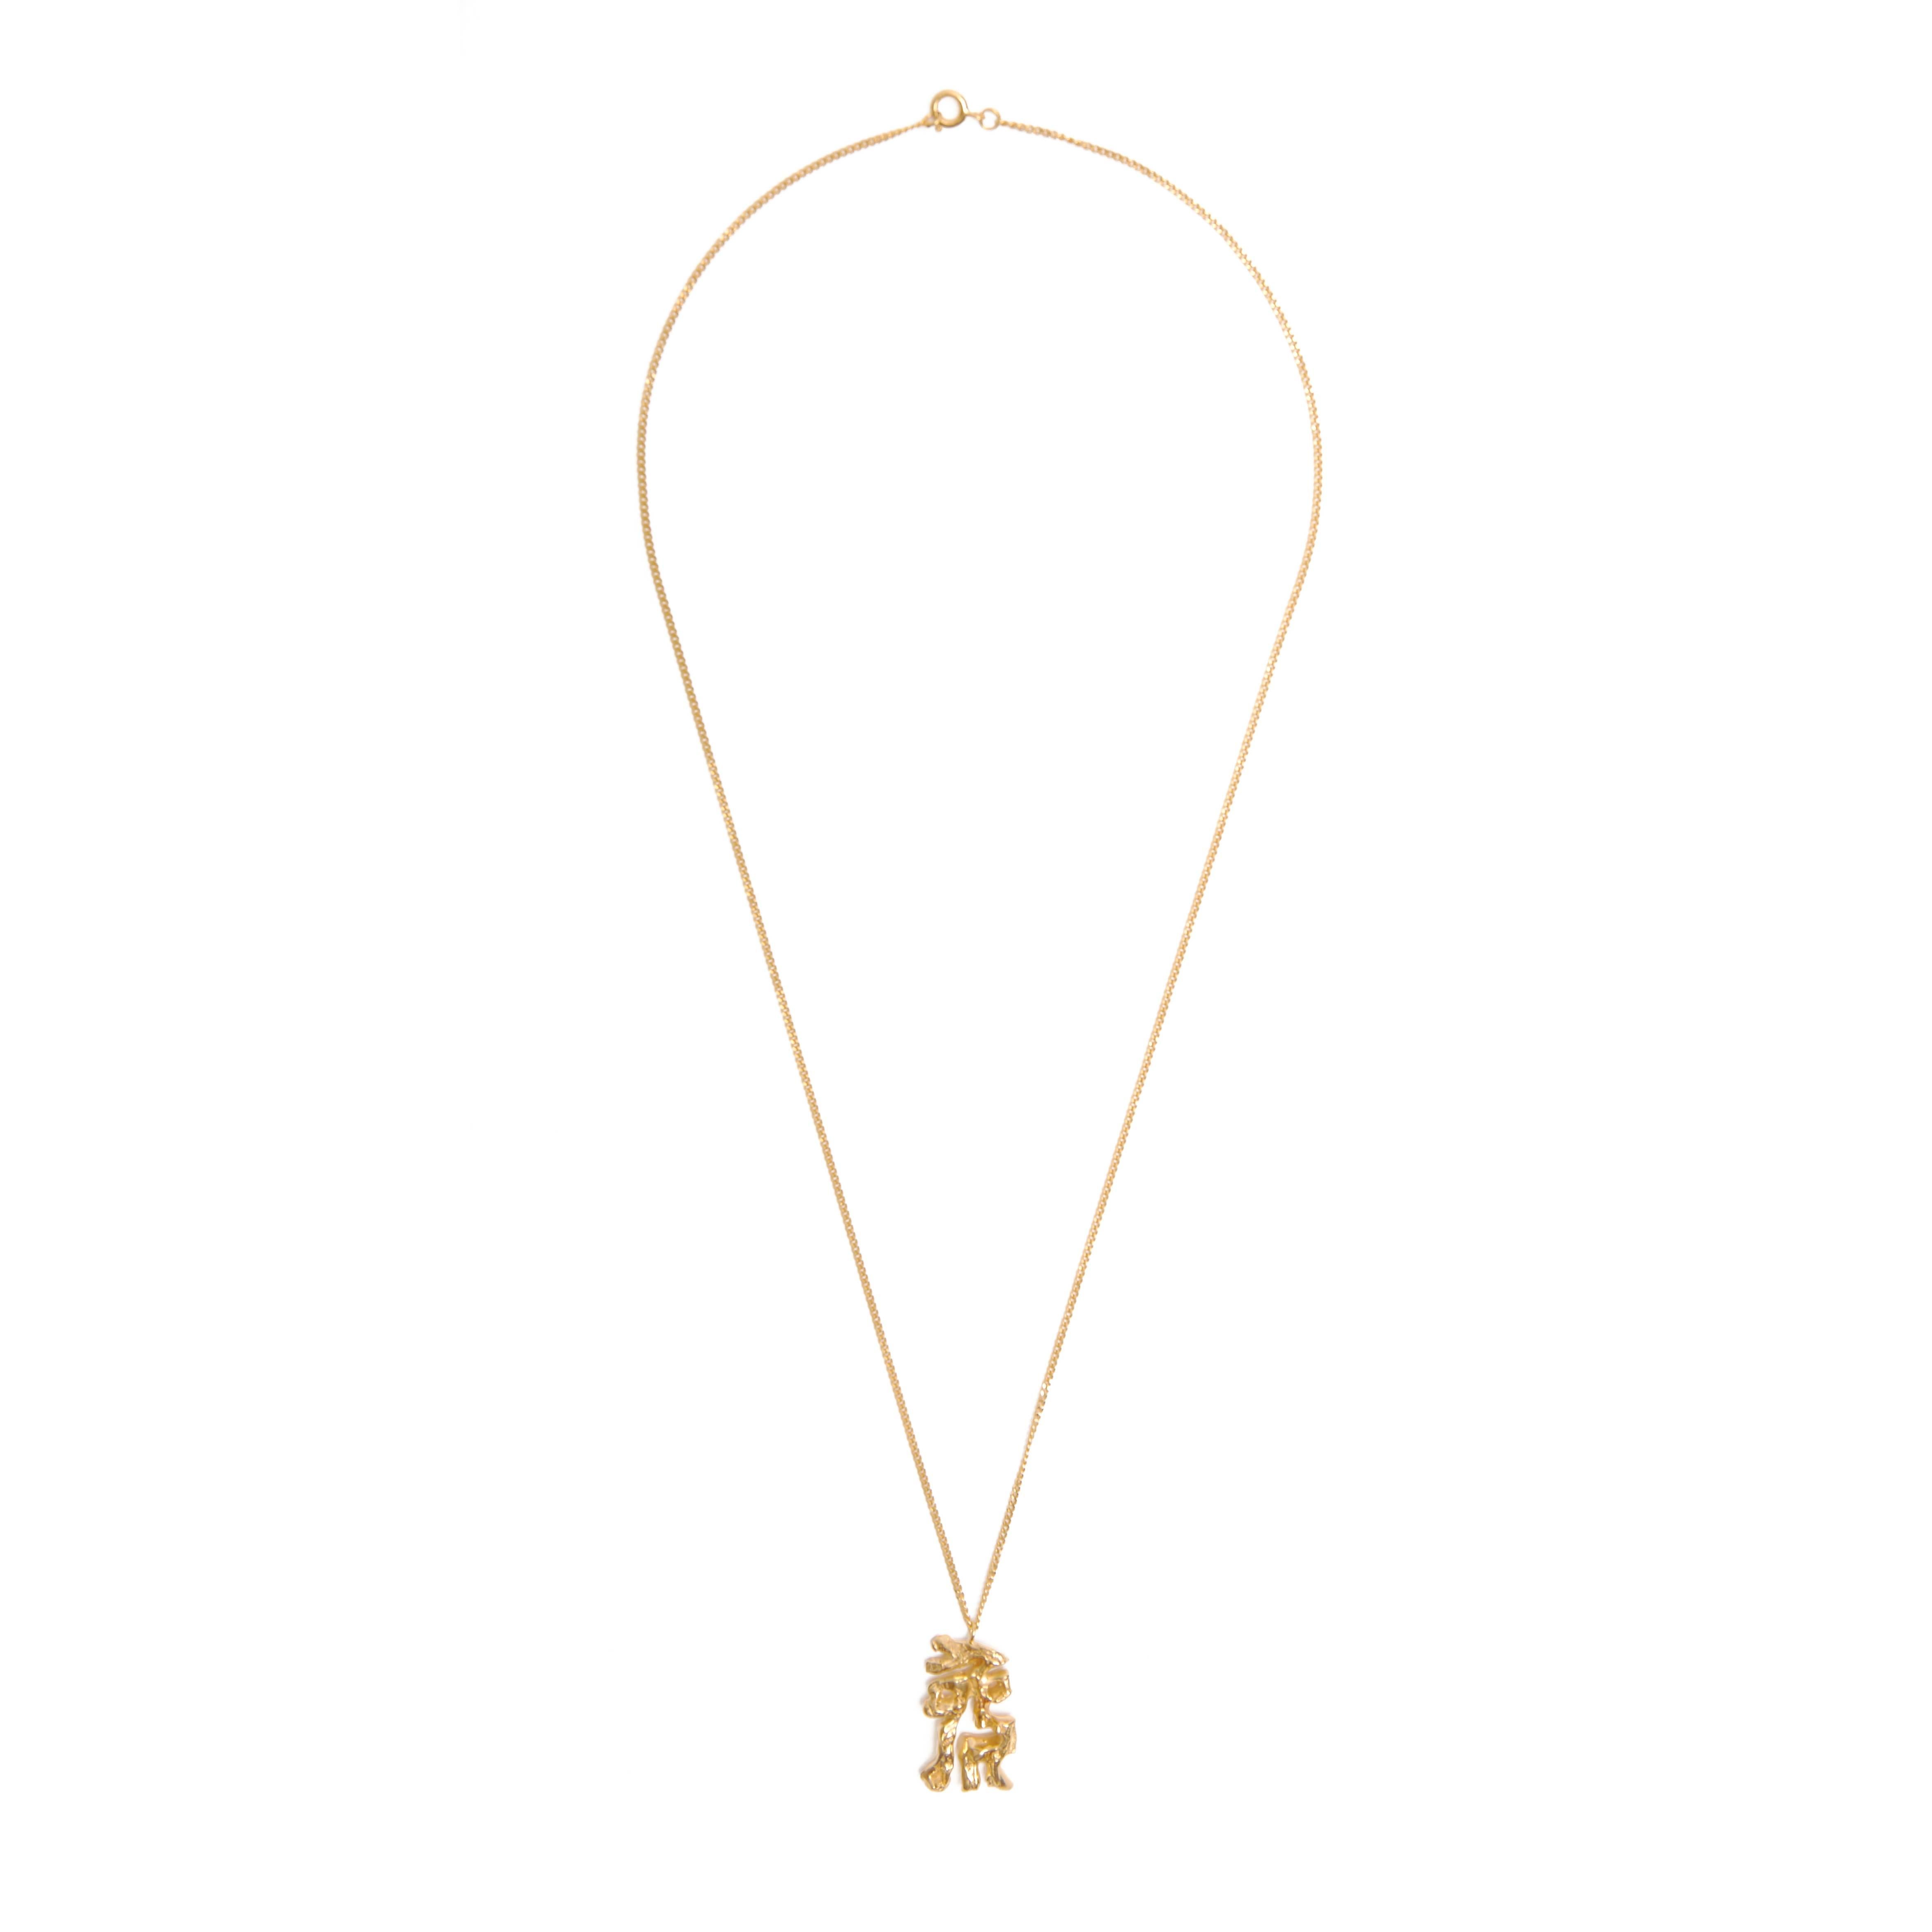 The Chinese zodiac Rabbit necklace is inspired by the ancient Chinese calligraphy character of Rabbit (Tu 兔), the fourth of the twelve signs of the Chinese zodiac. Rabbits are usually gentle souls, possessed with an abundance of compassion and a